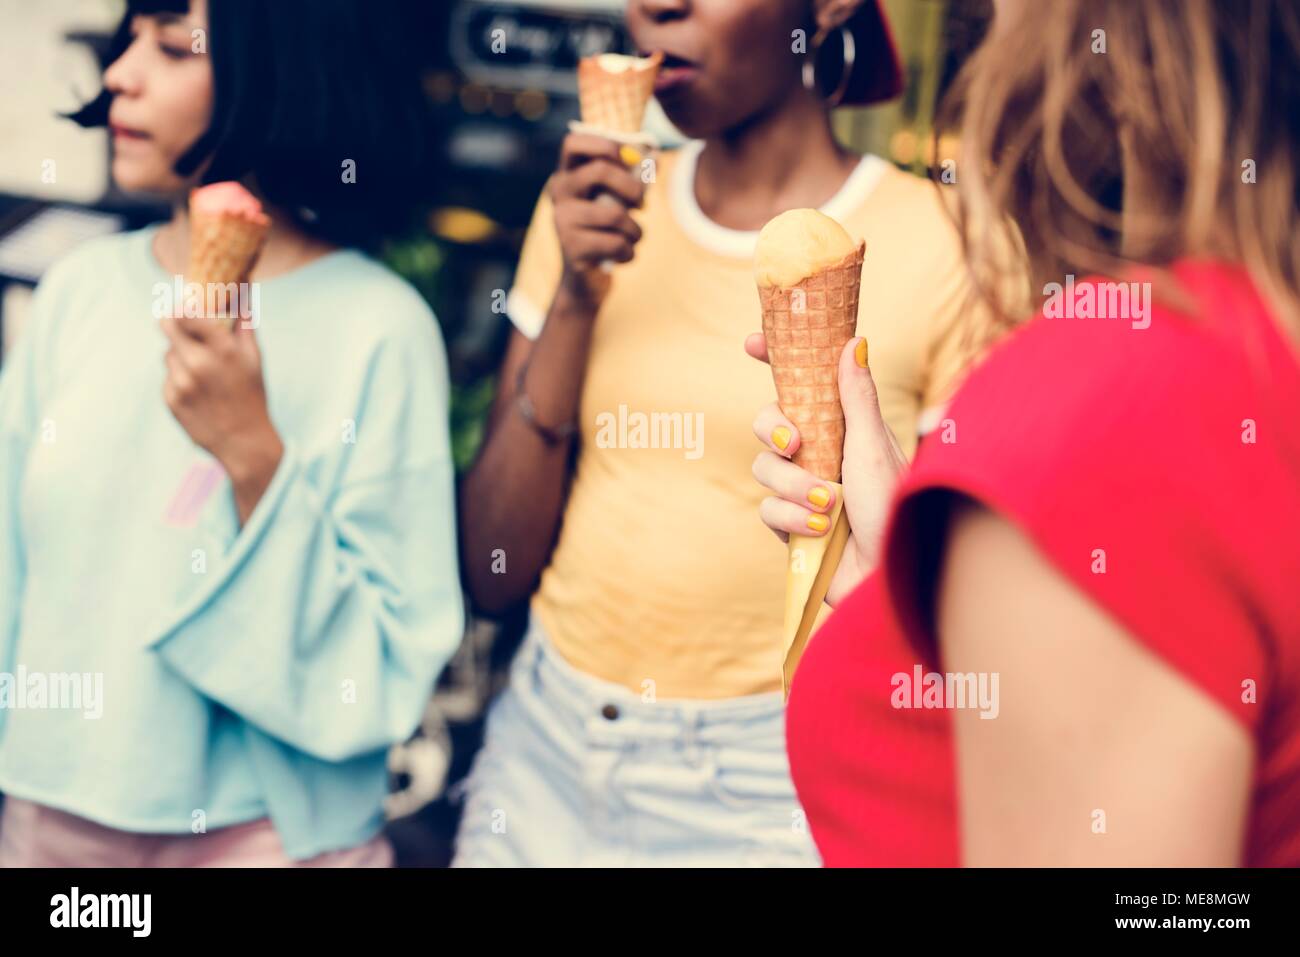 Group of diverse women eating ice cream together Stock Photo